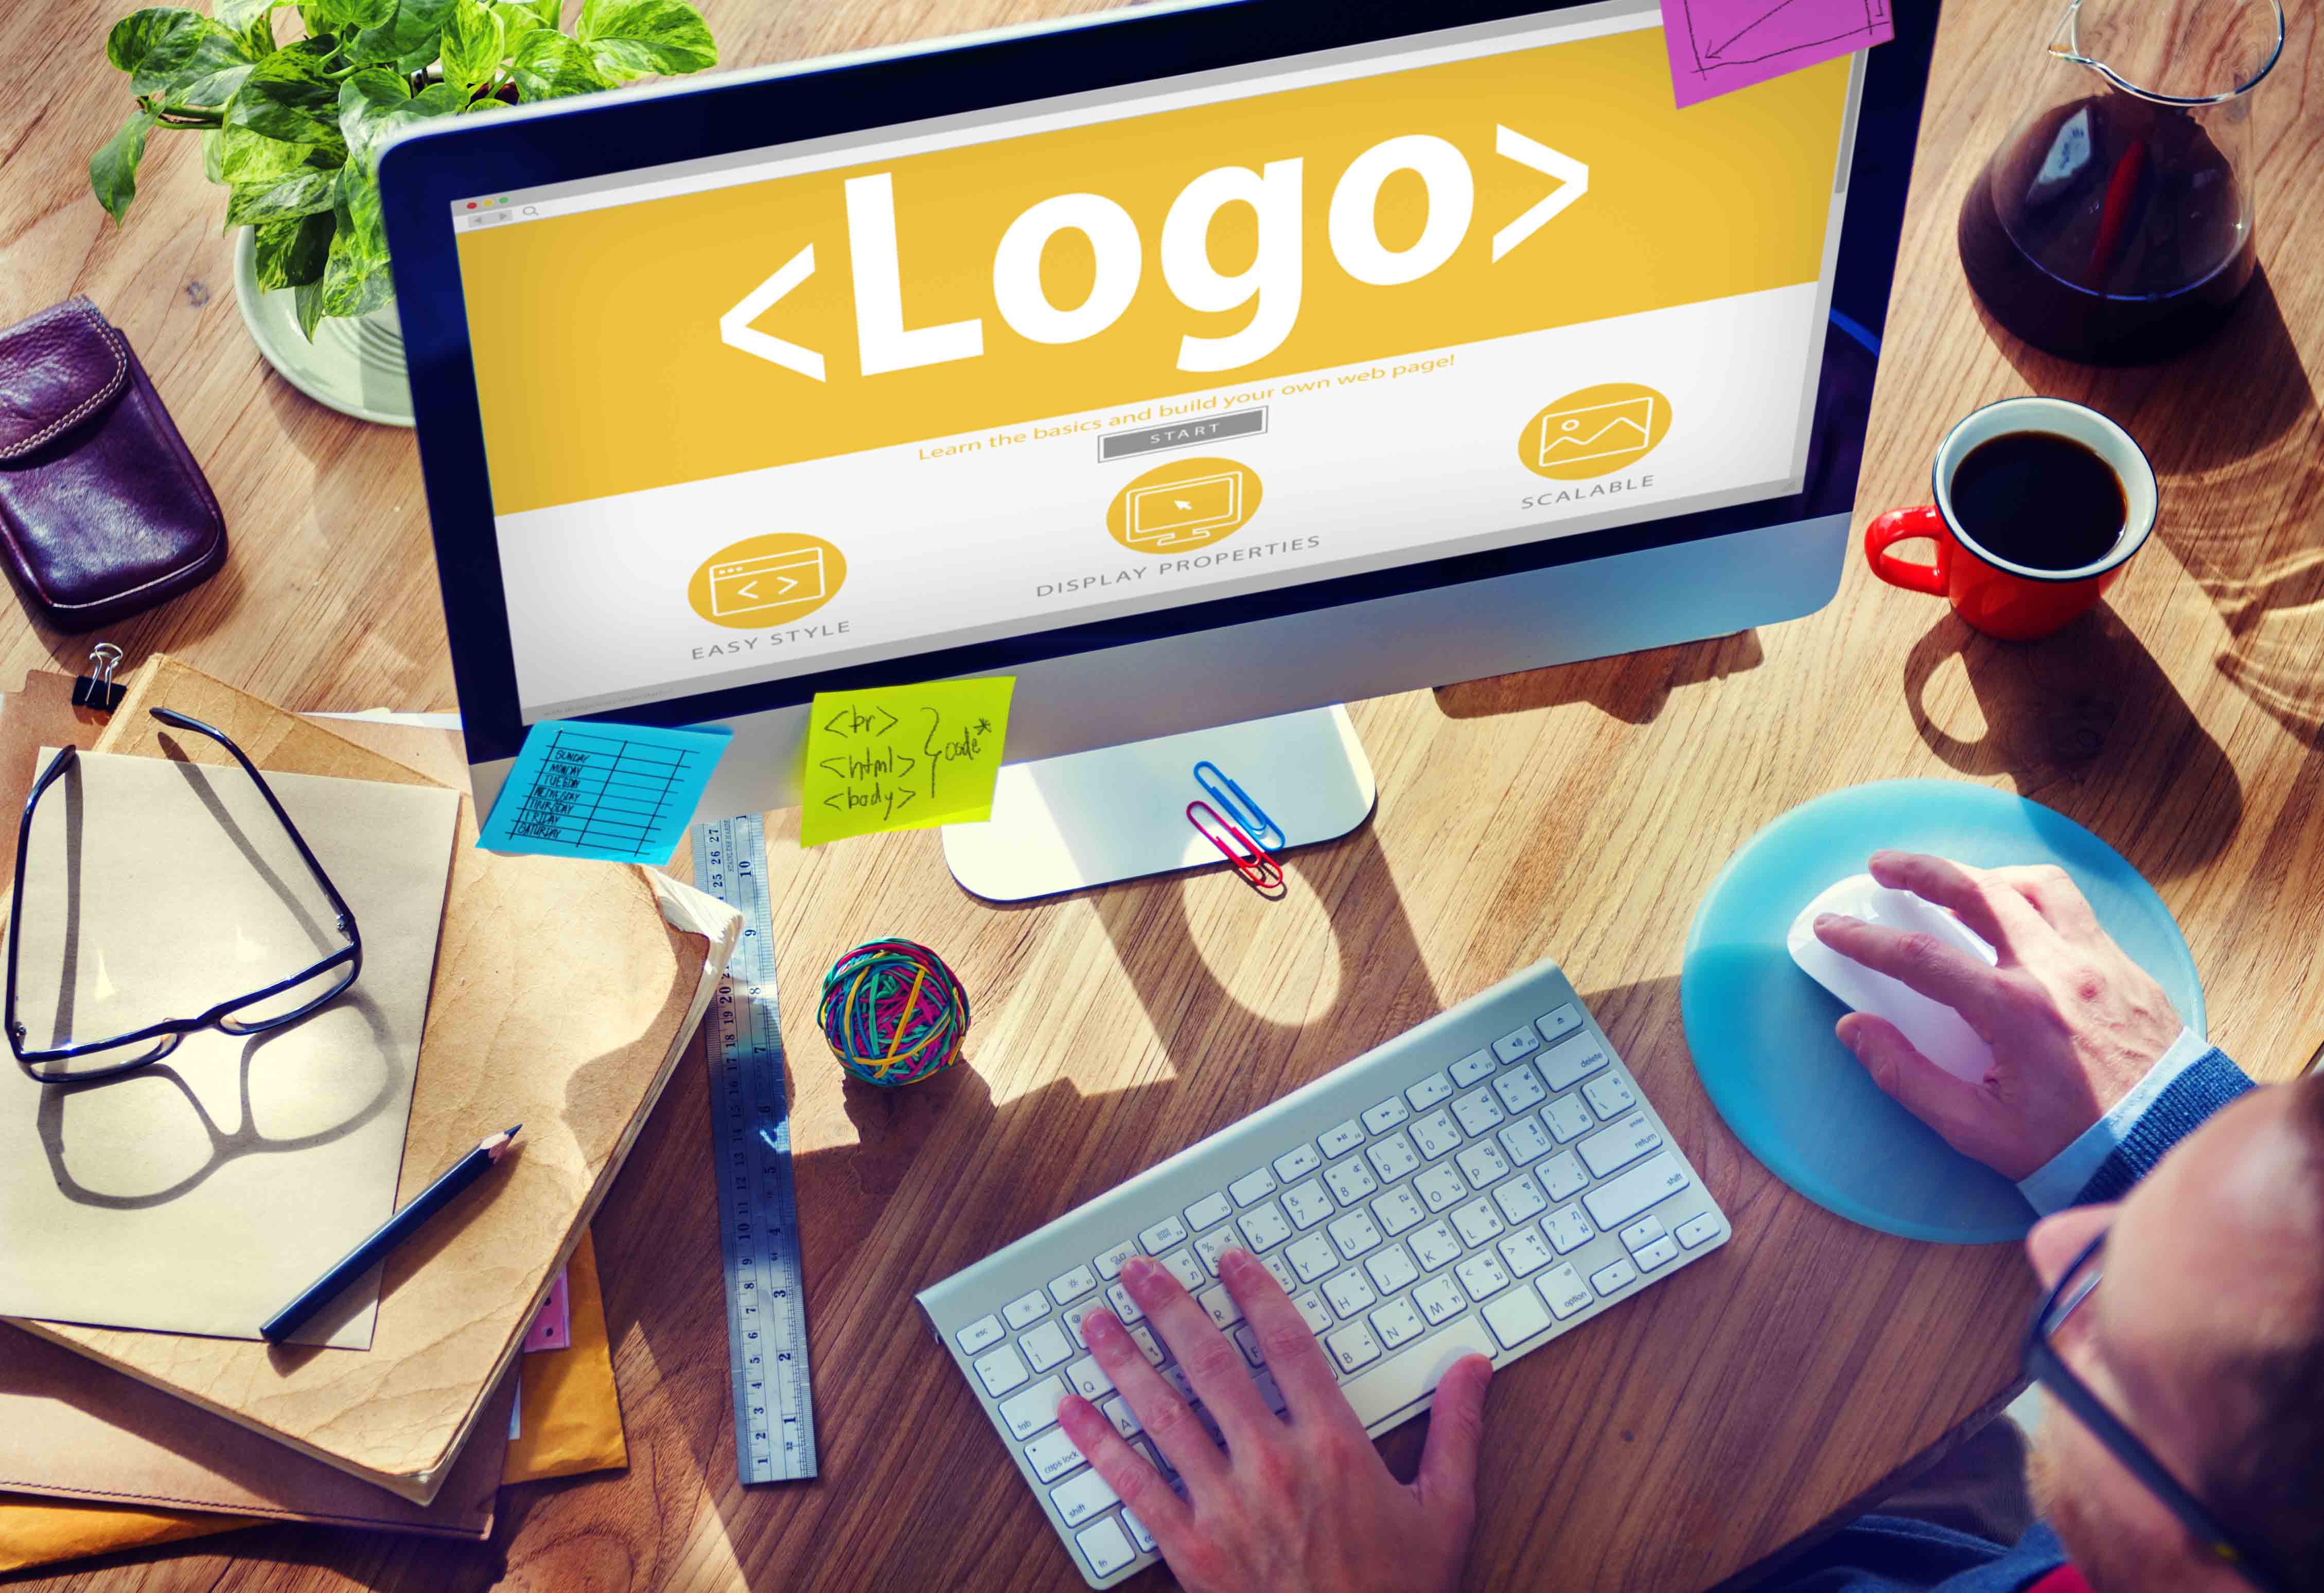 Can you patent a logo?